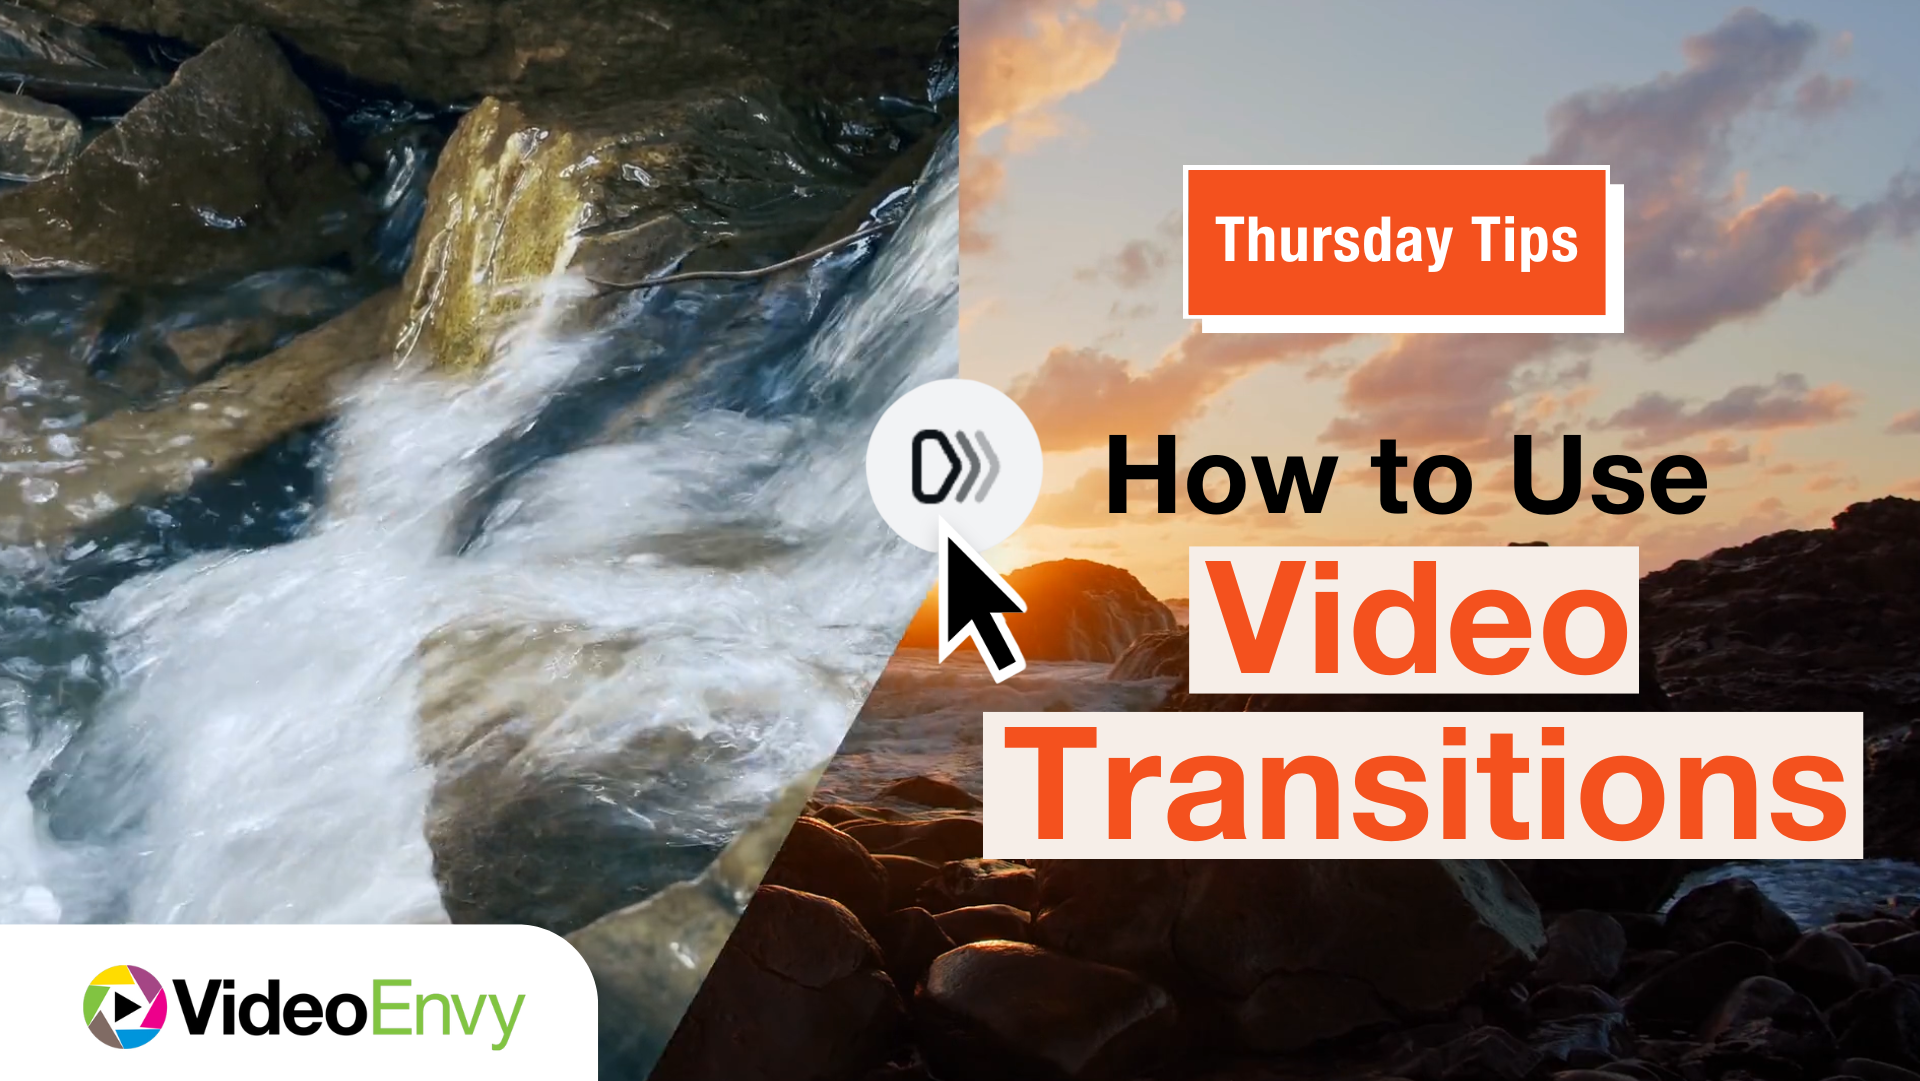 Thursday Tips: How to Use Video Transitions